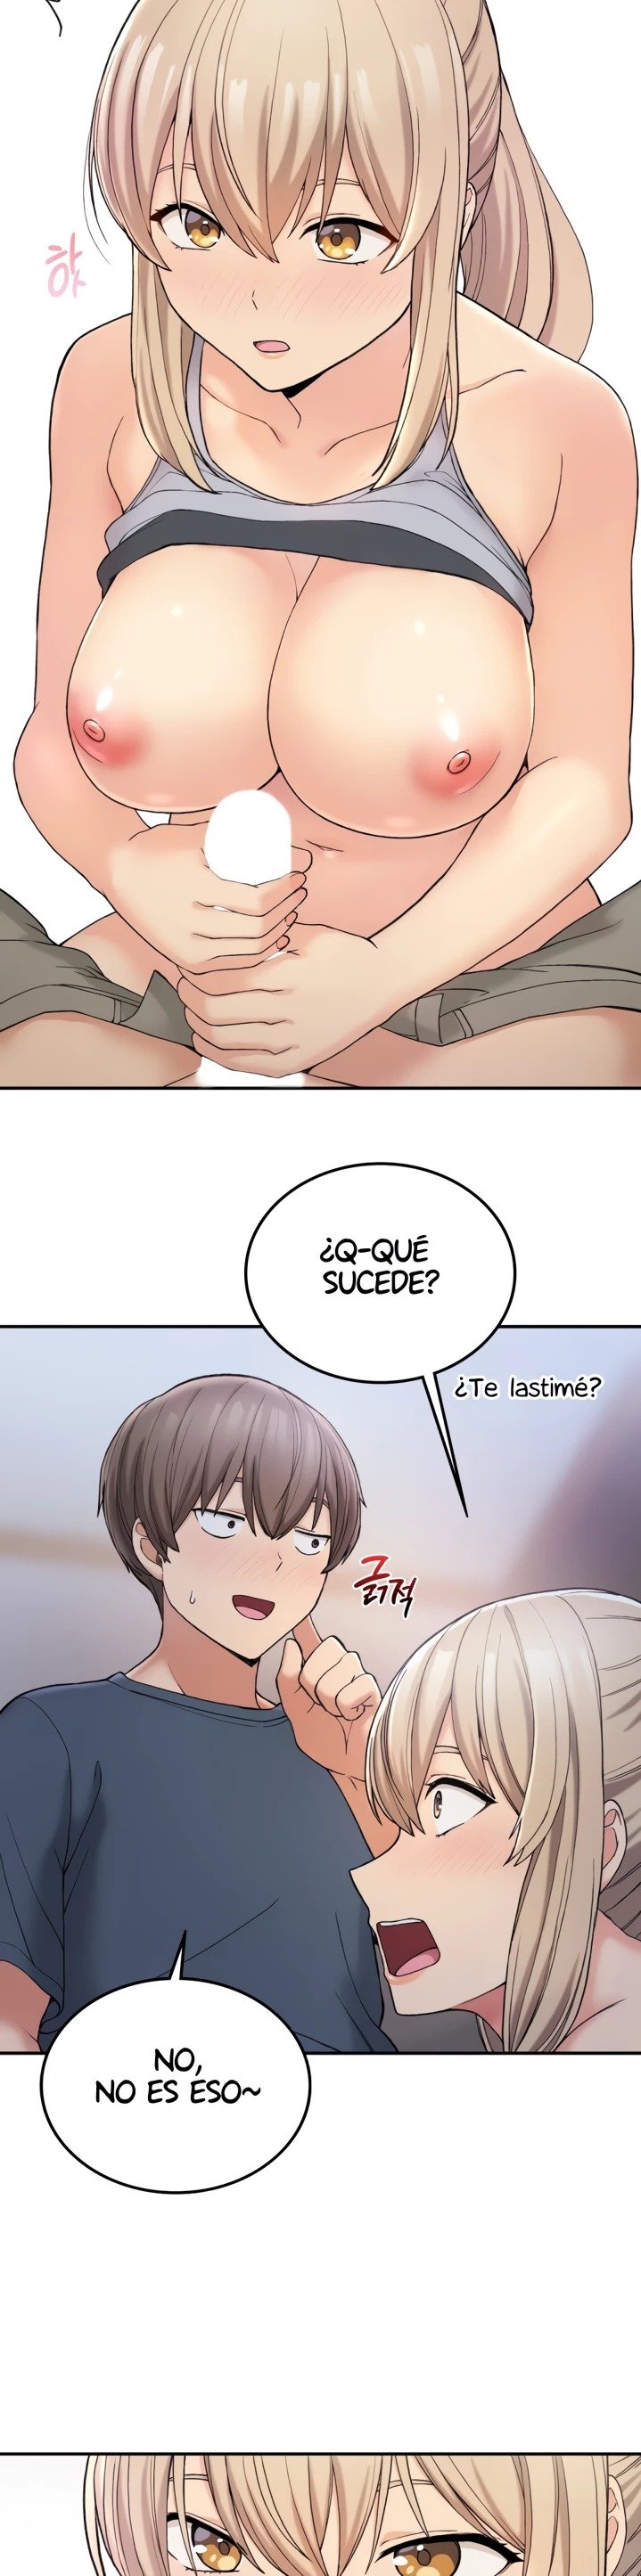 shall-we-live-together-in-the-country-raw-chap-3-28